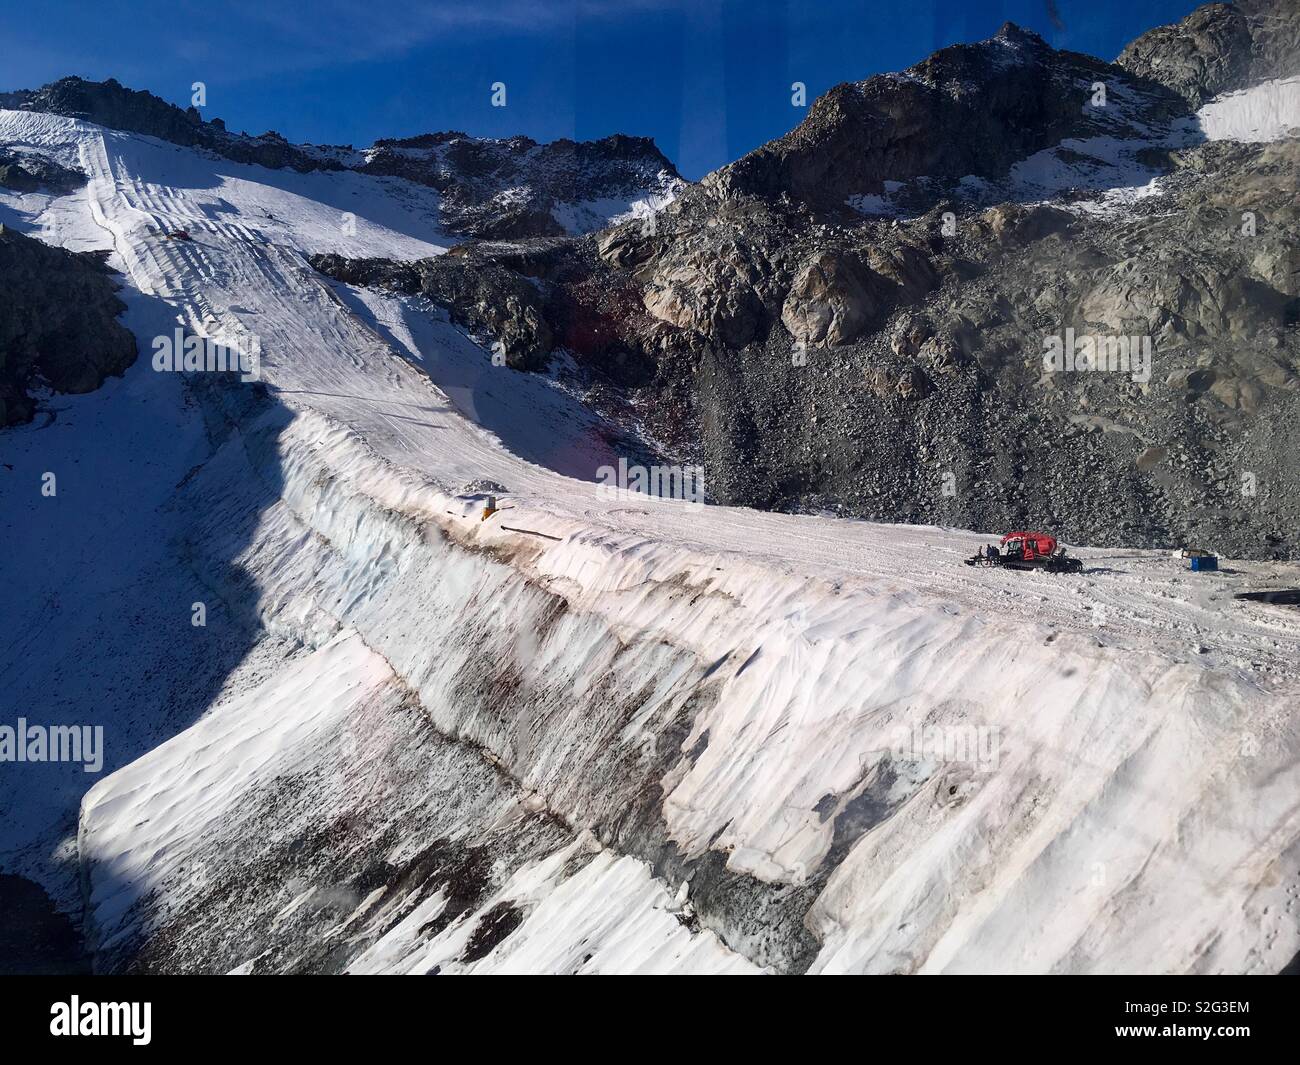 Present glacier covered with fleece fabric to keep from receding to make skiing in winter impossible. Tonale Pass, Adamello min Range, Trentino, Italy. Stock Photo